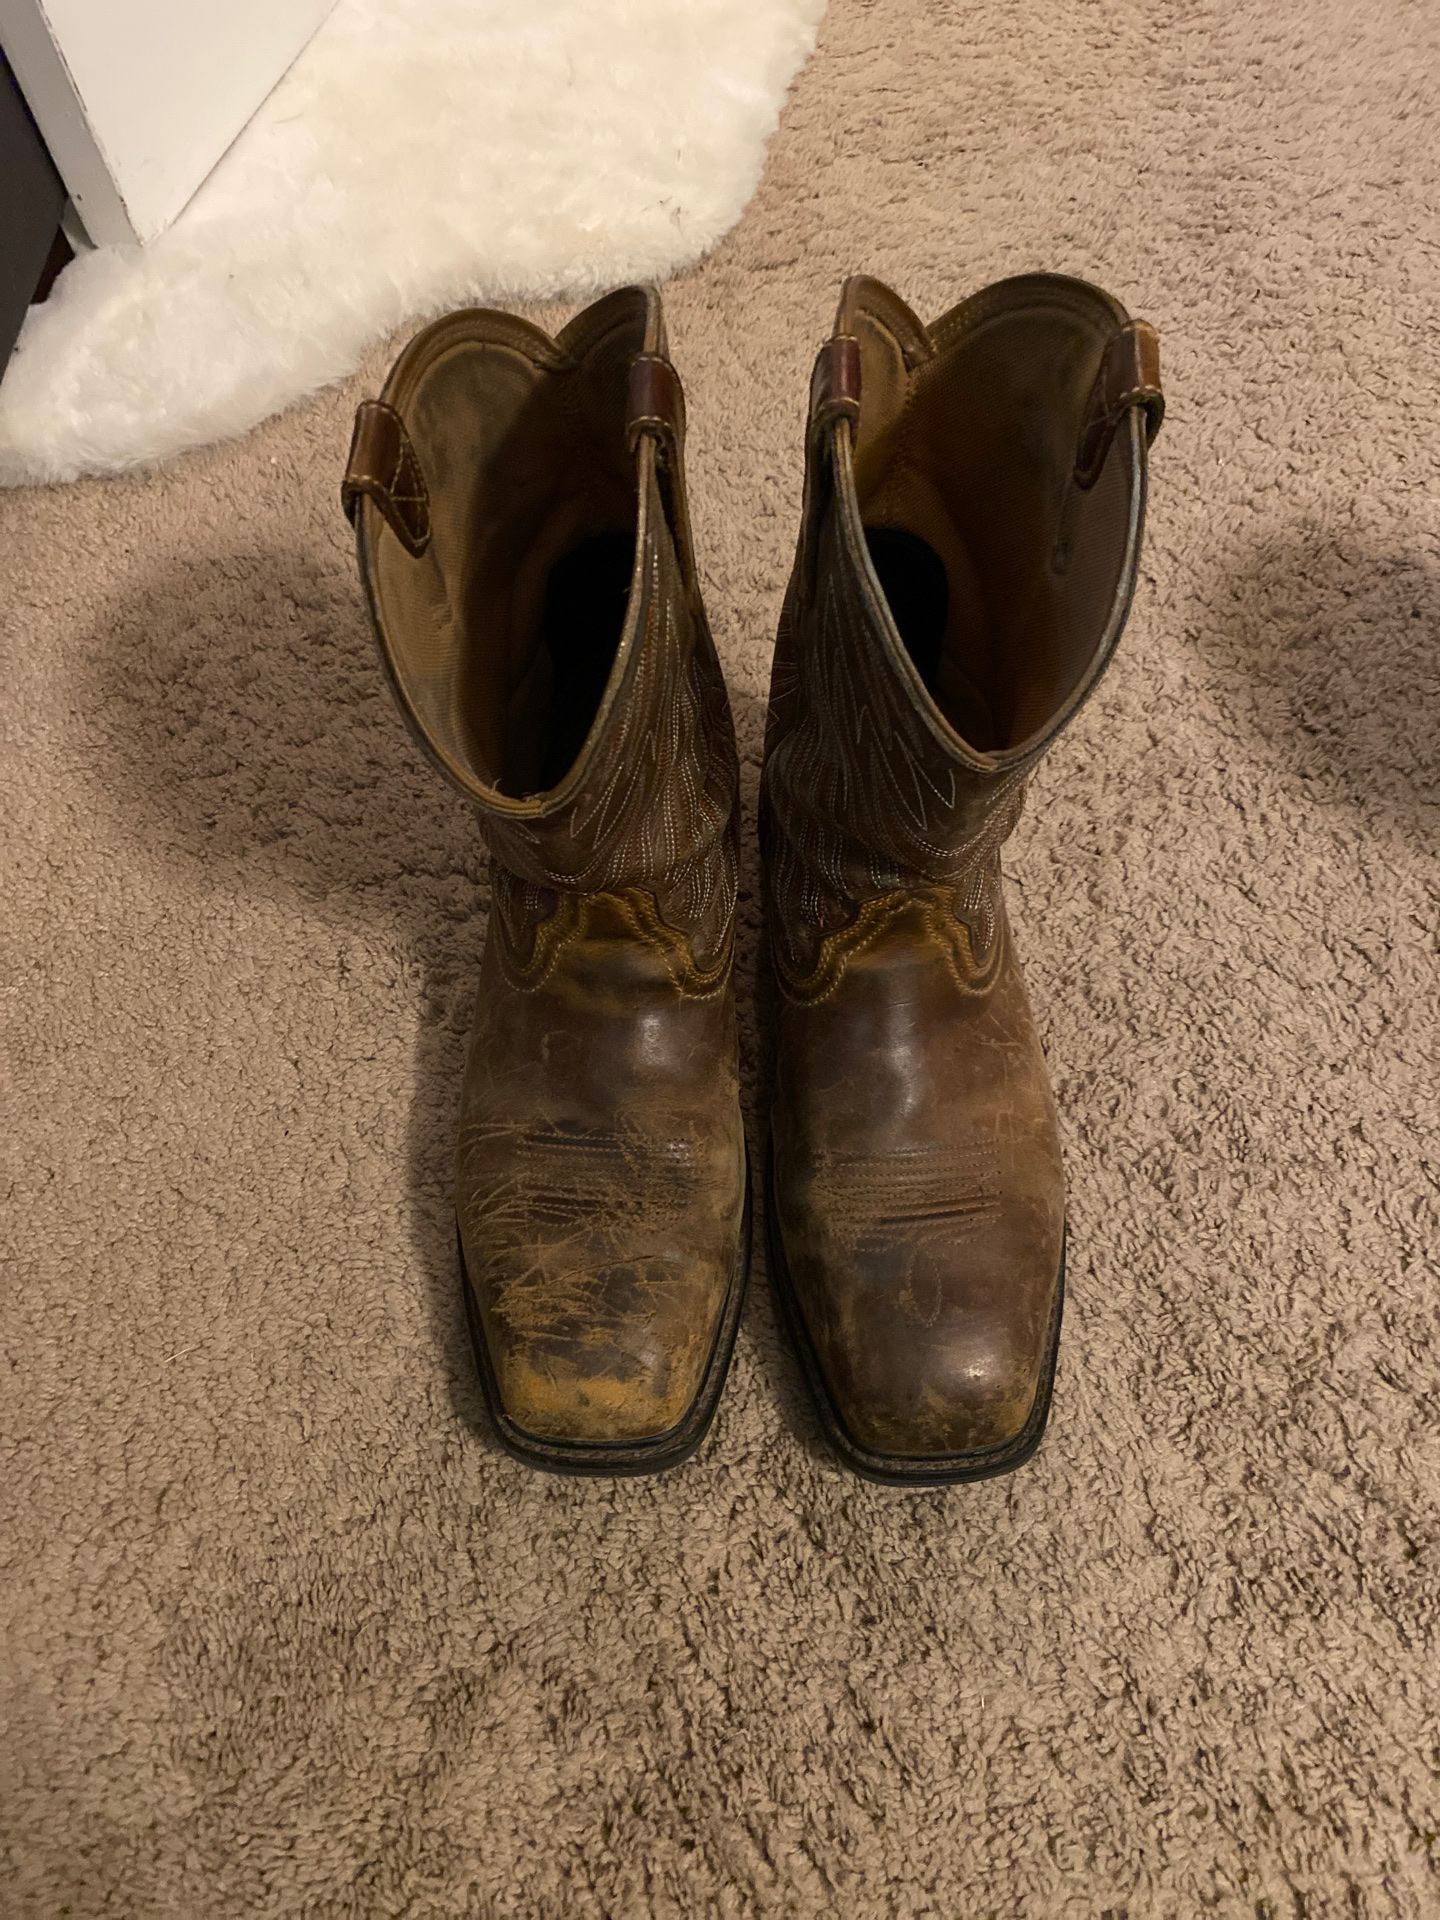 Composite toe ariat work boots (size 12)